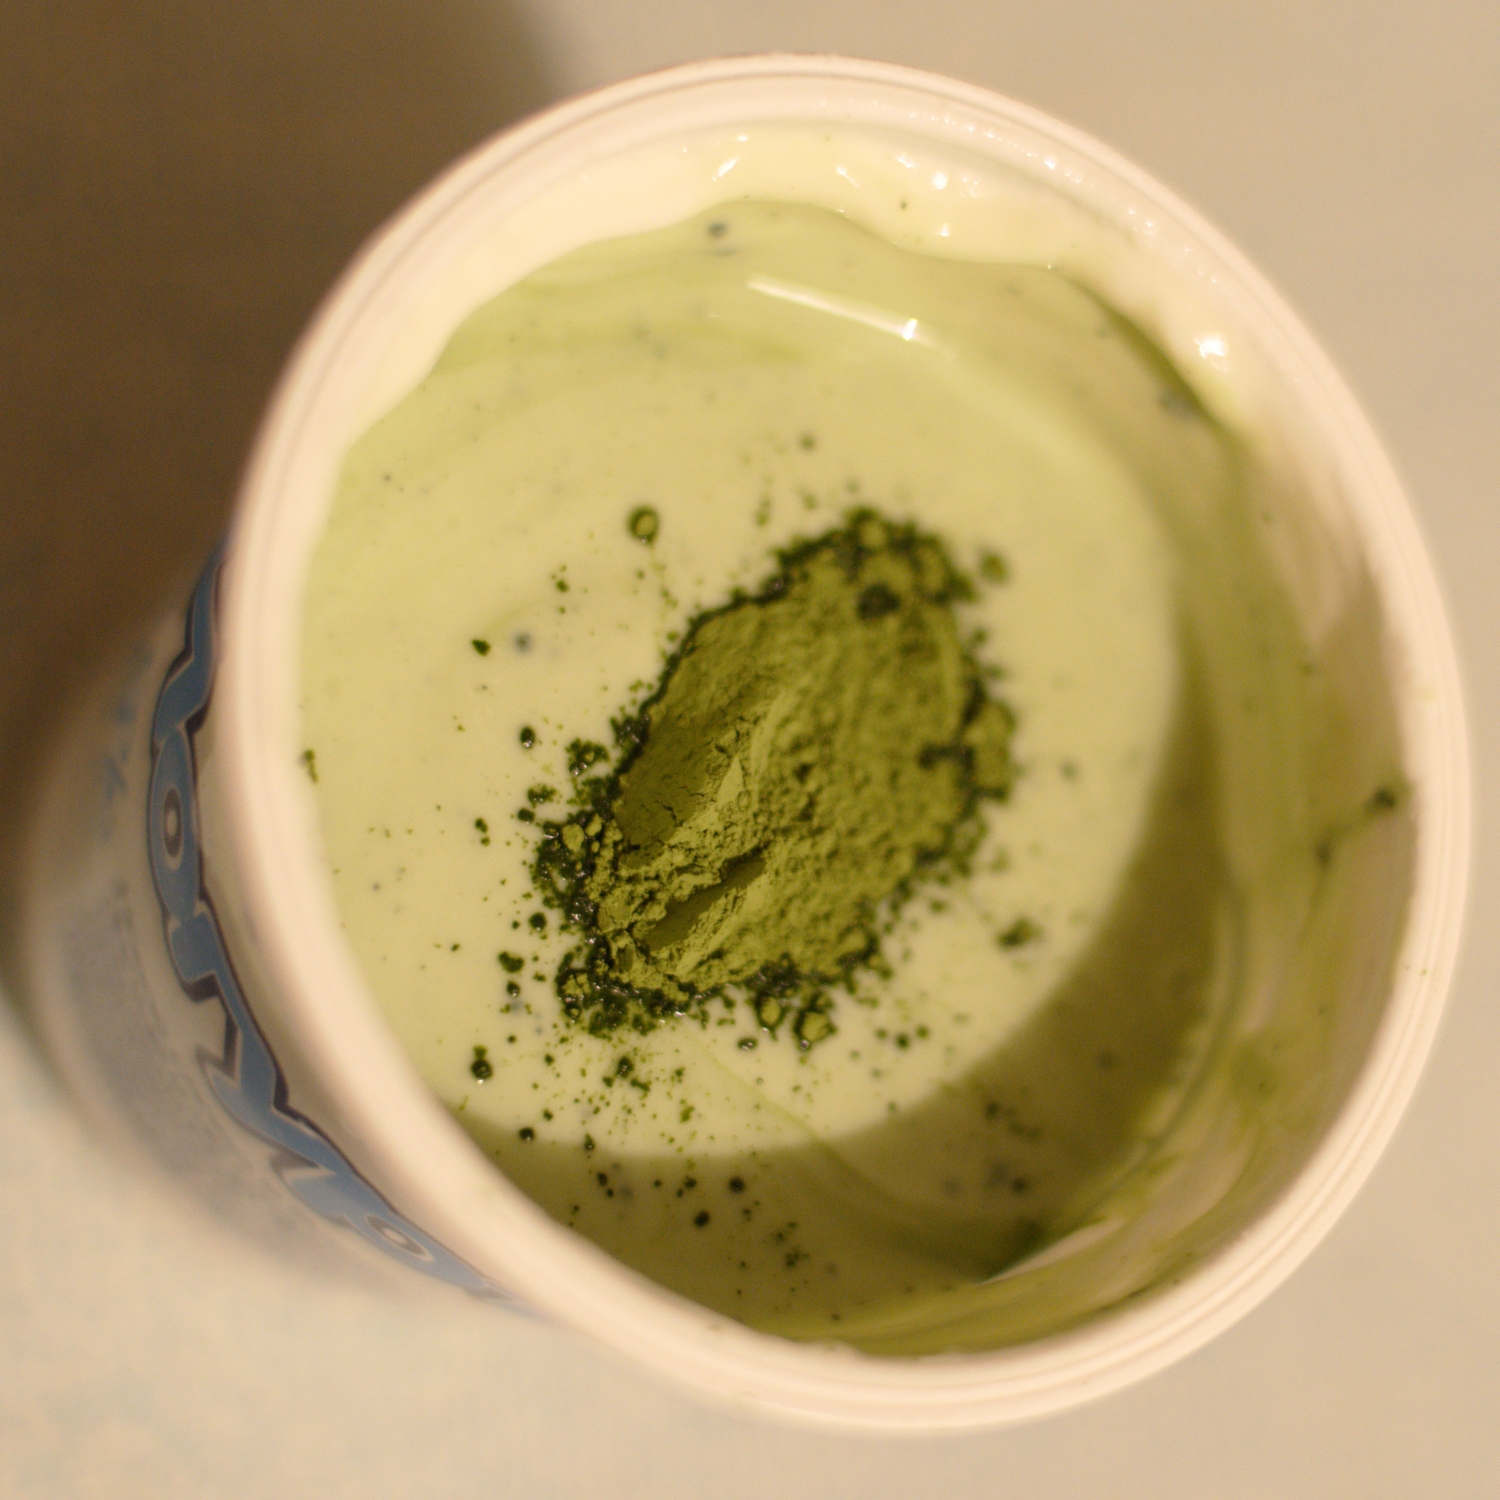 a white cup filled with green stuff and some other things